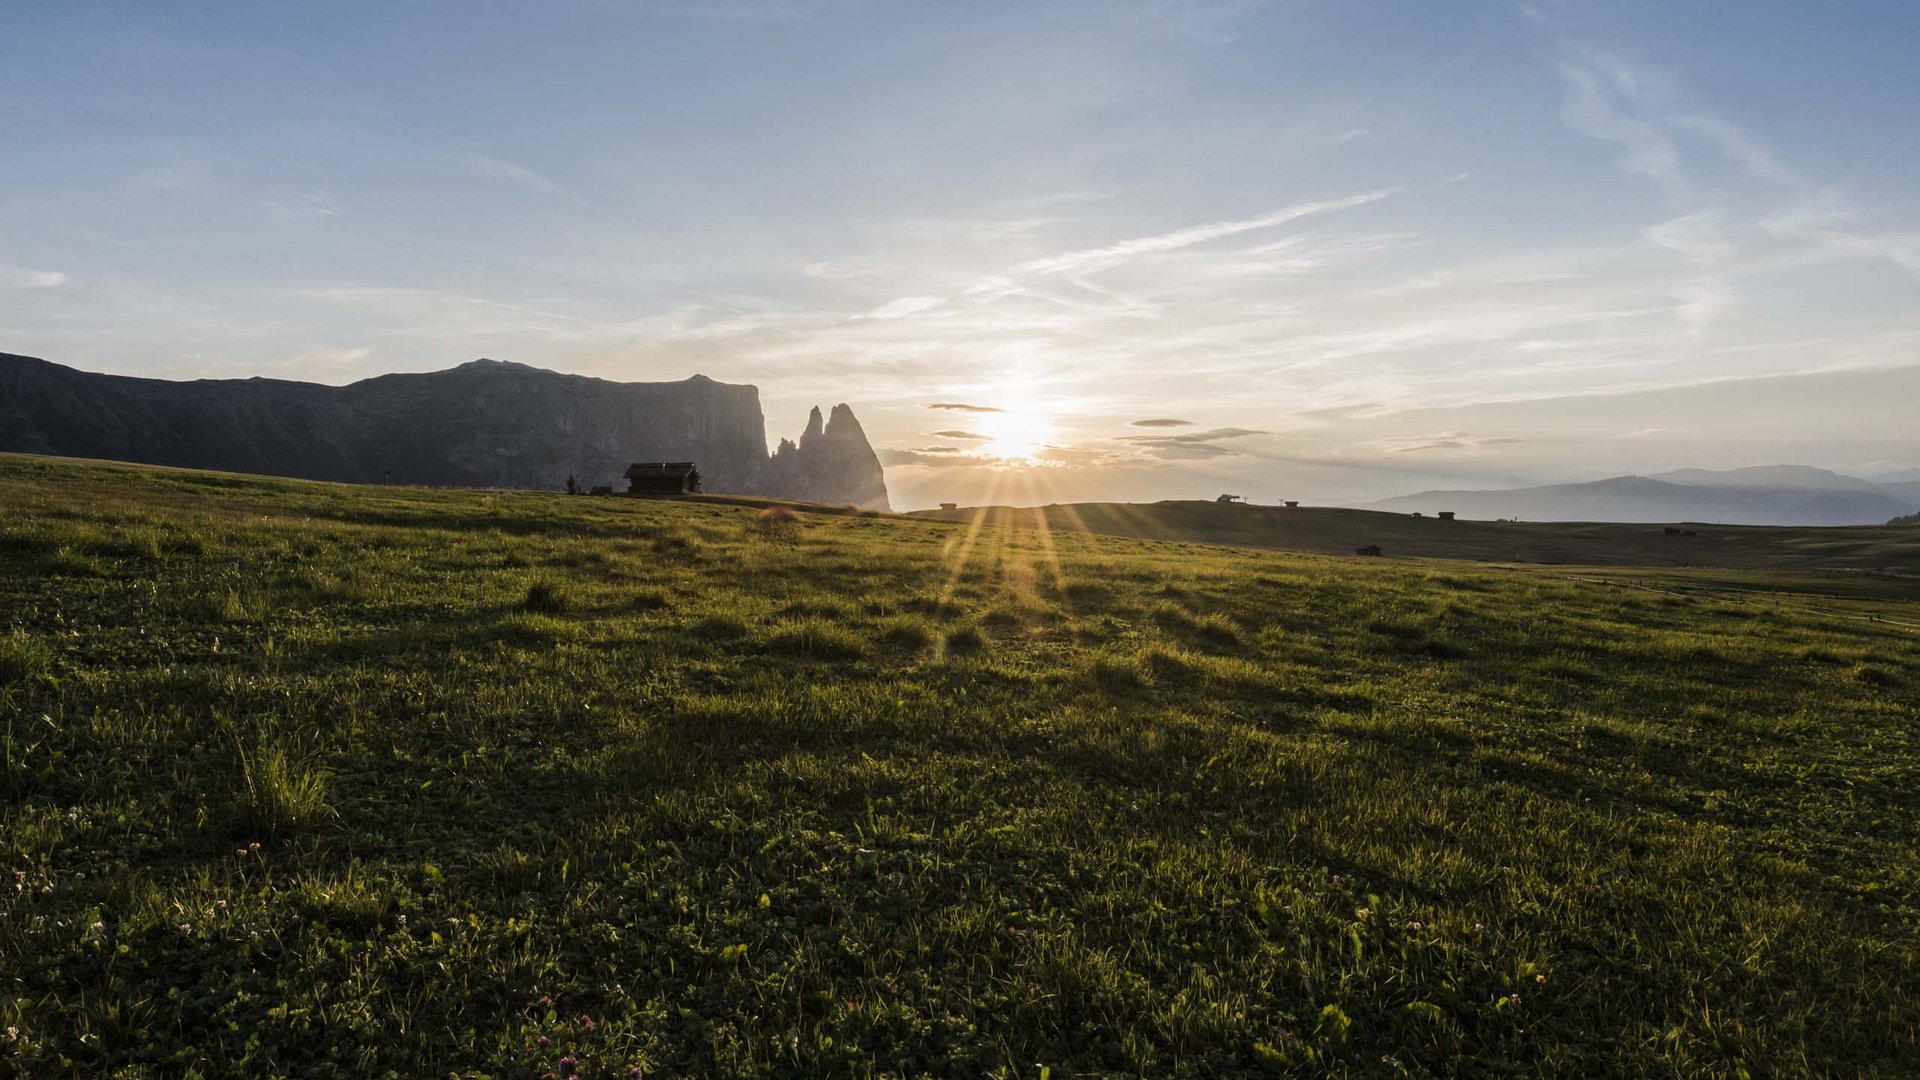 All the info about your holiday at Alpe di Siusi/Seiser Alm